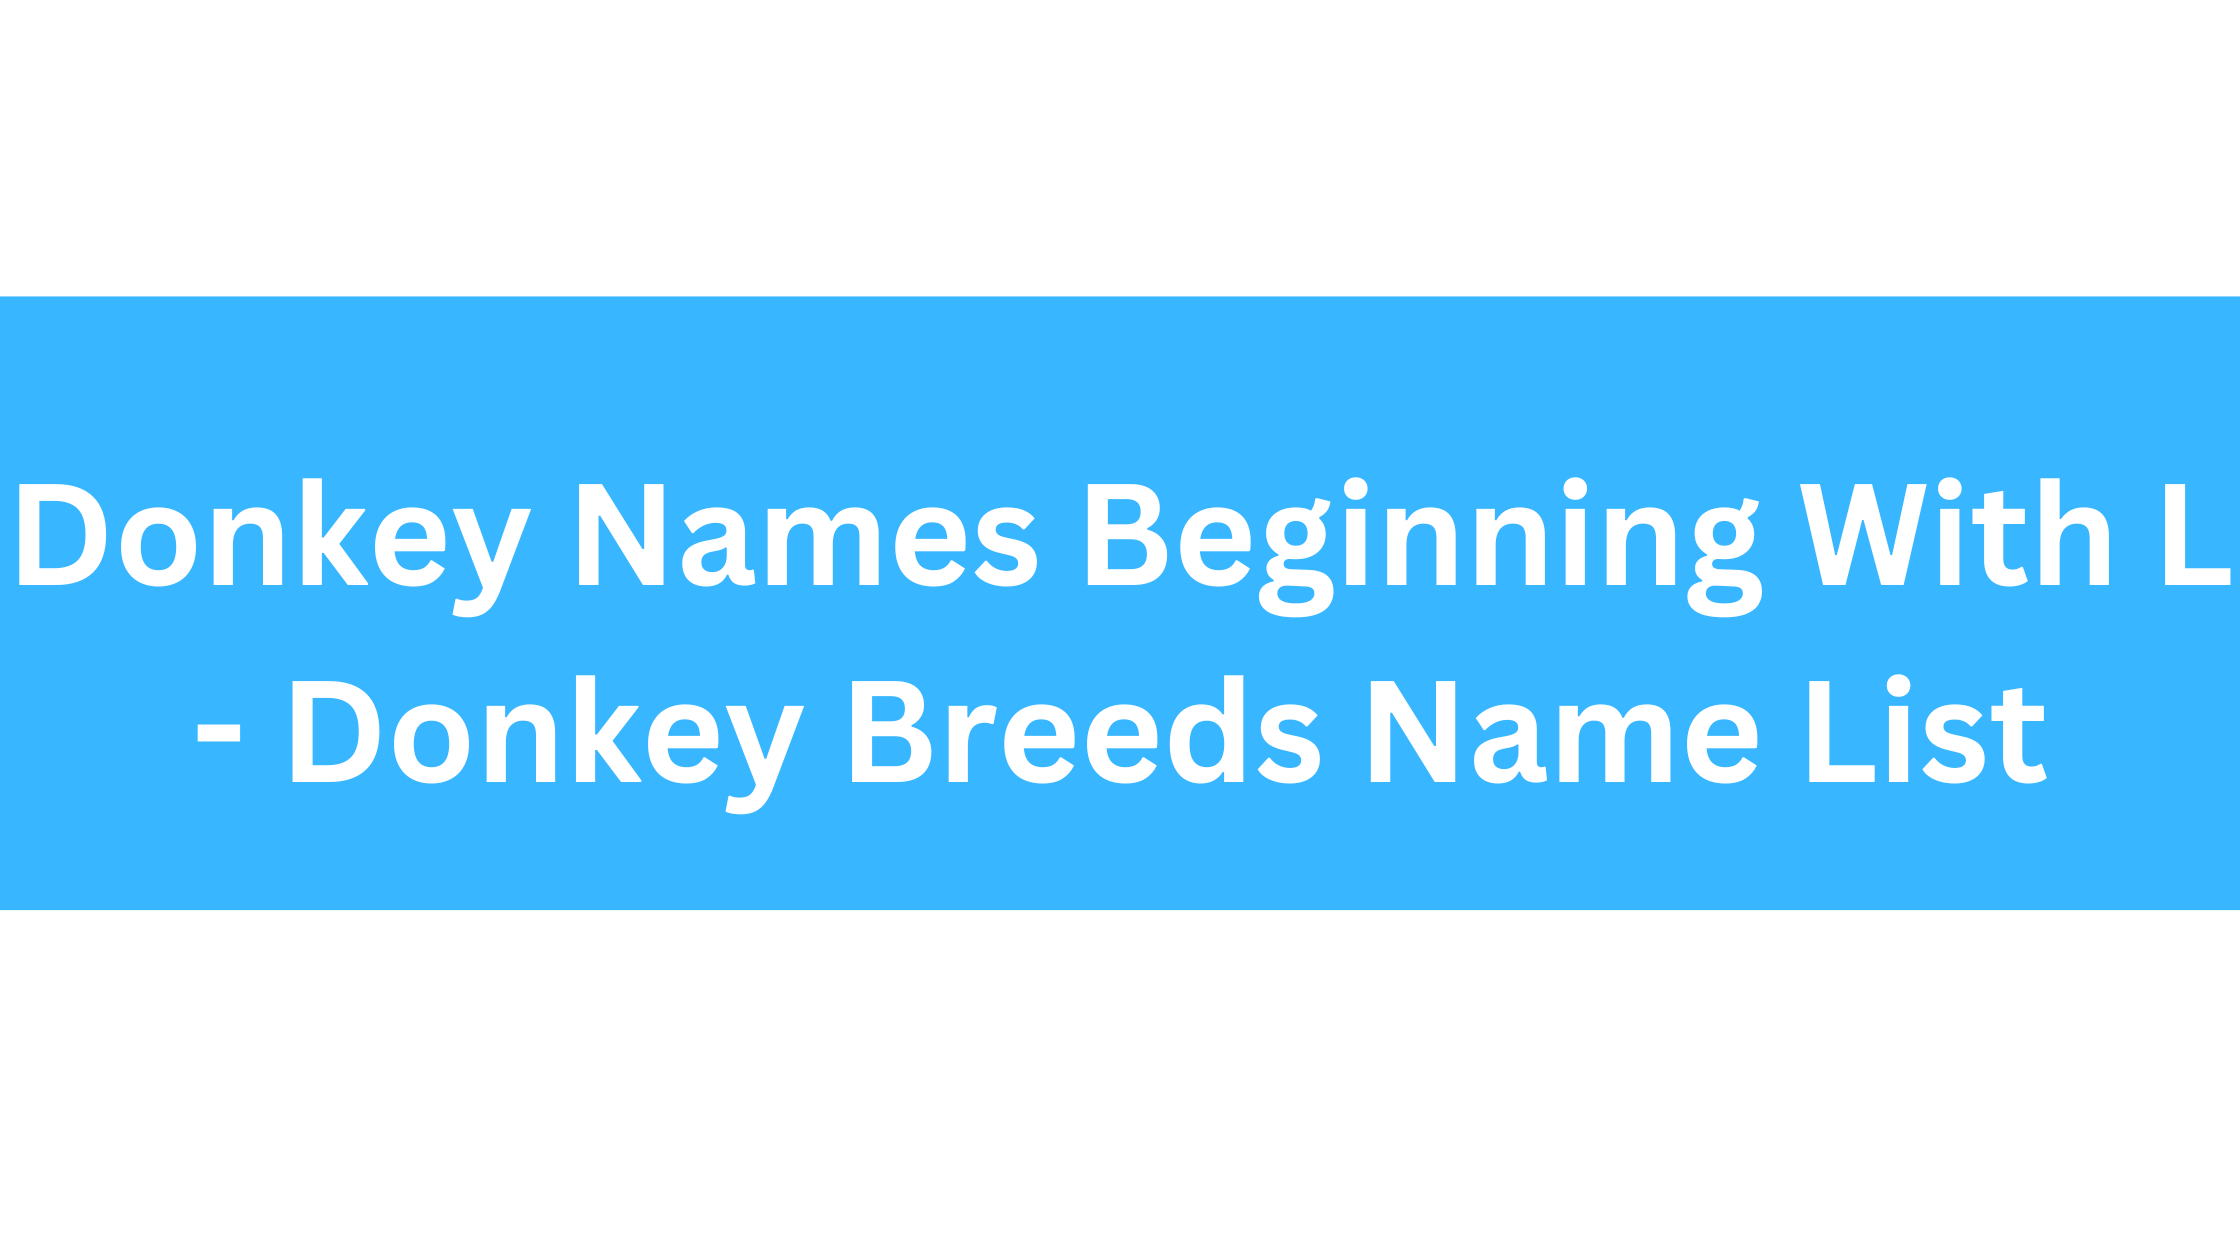 Donkey Names Beginning With L